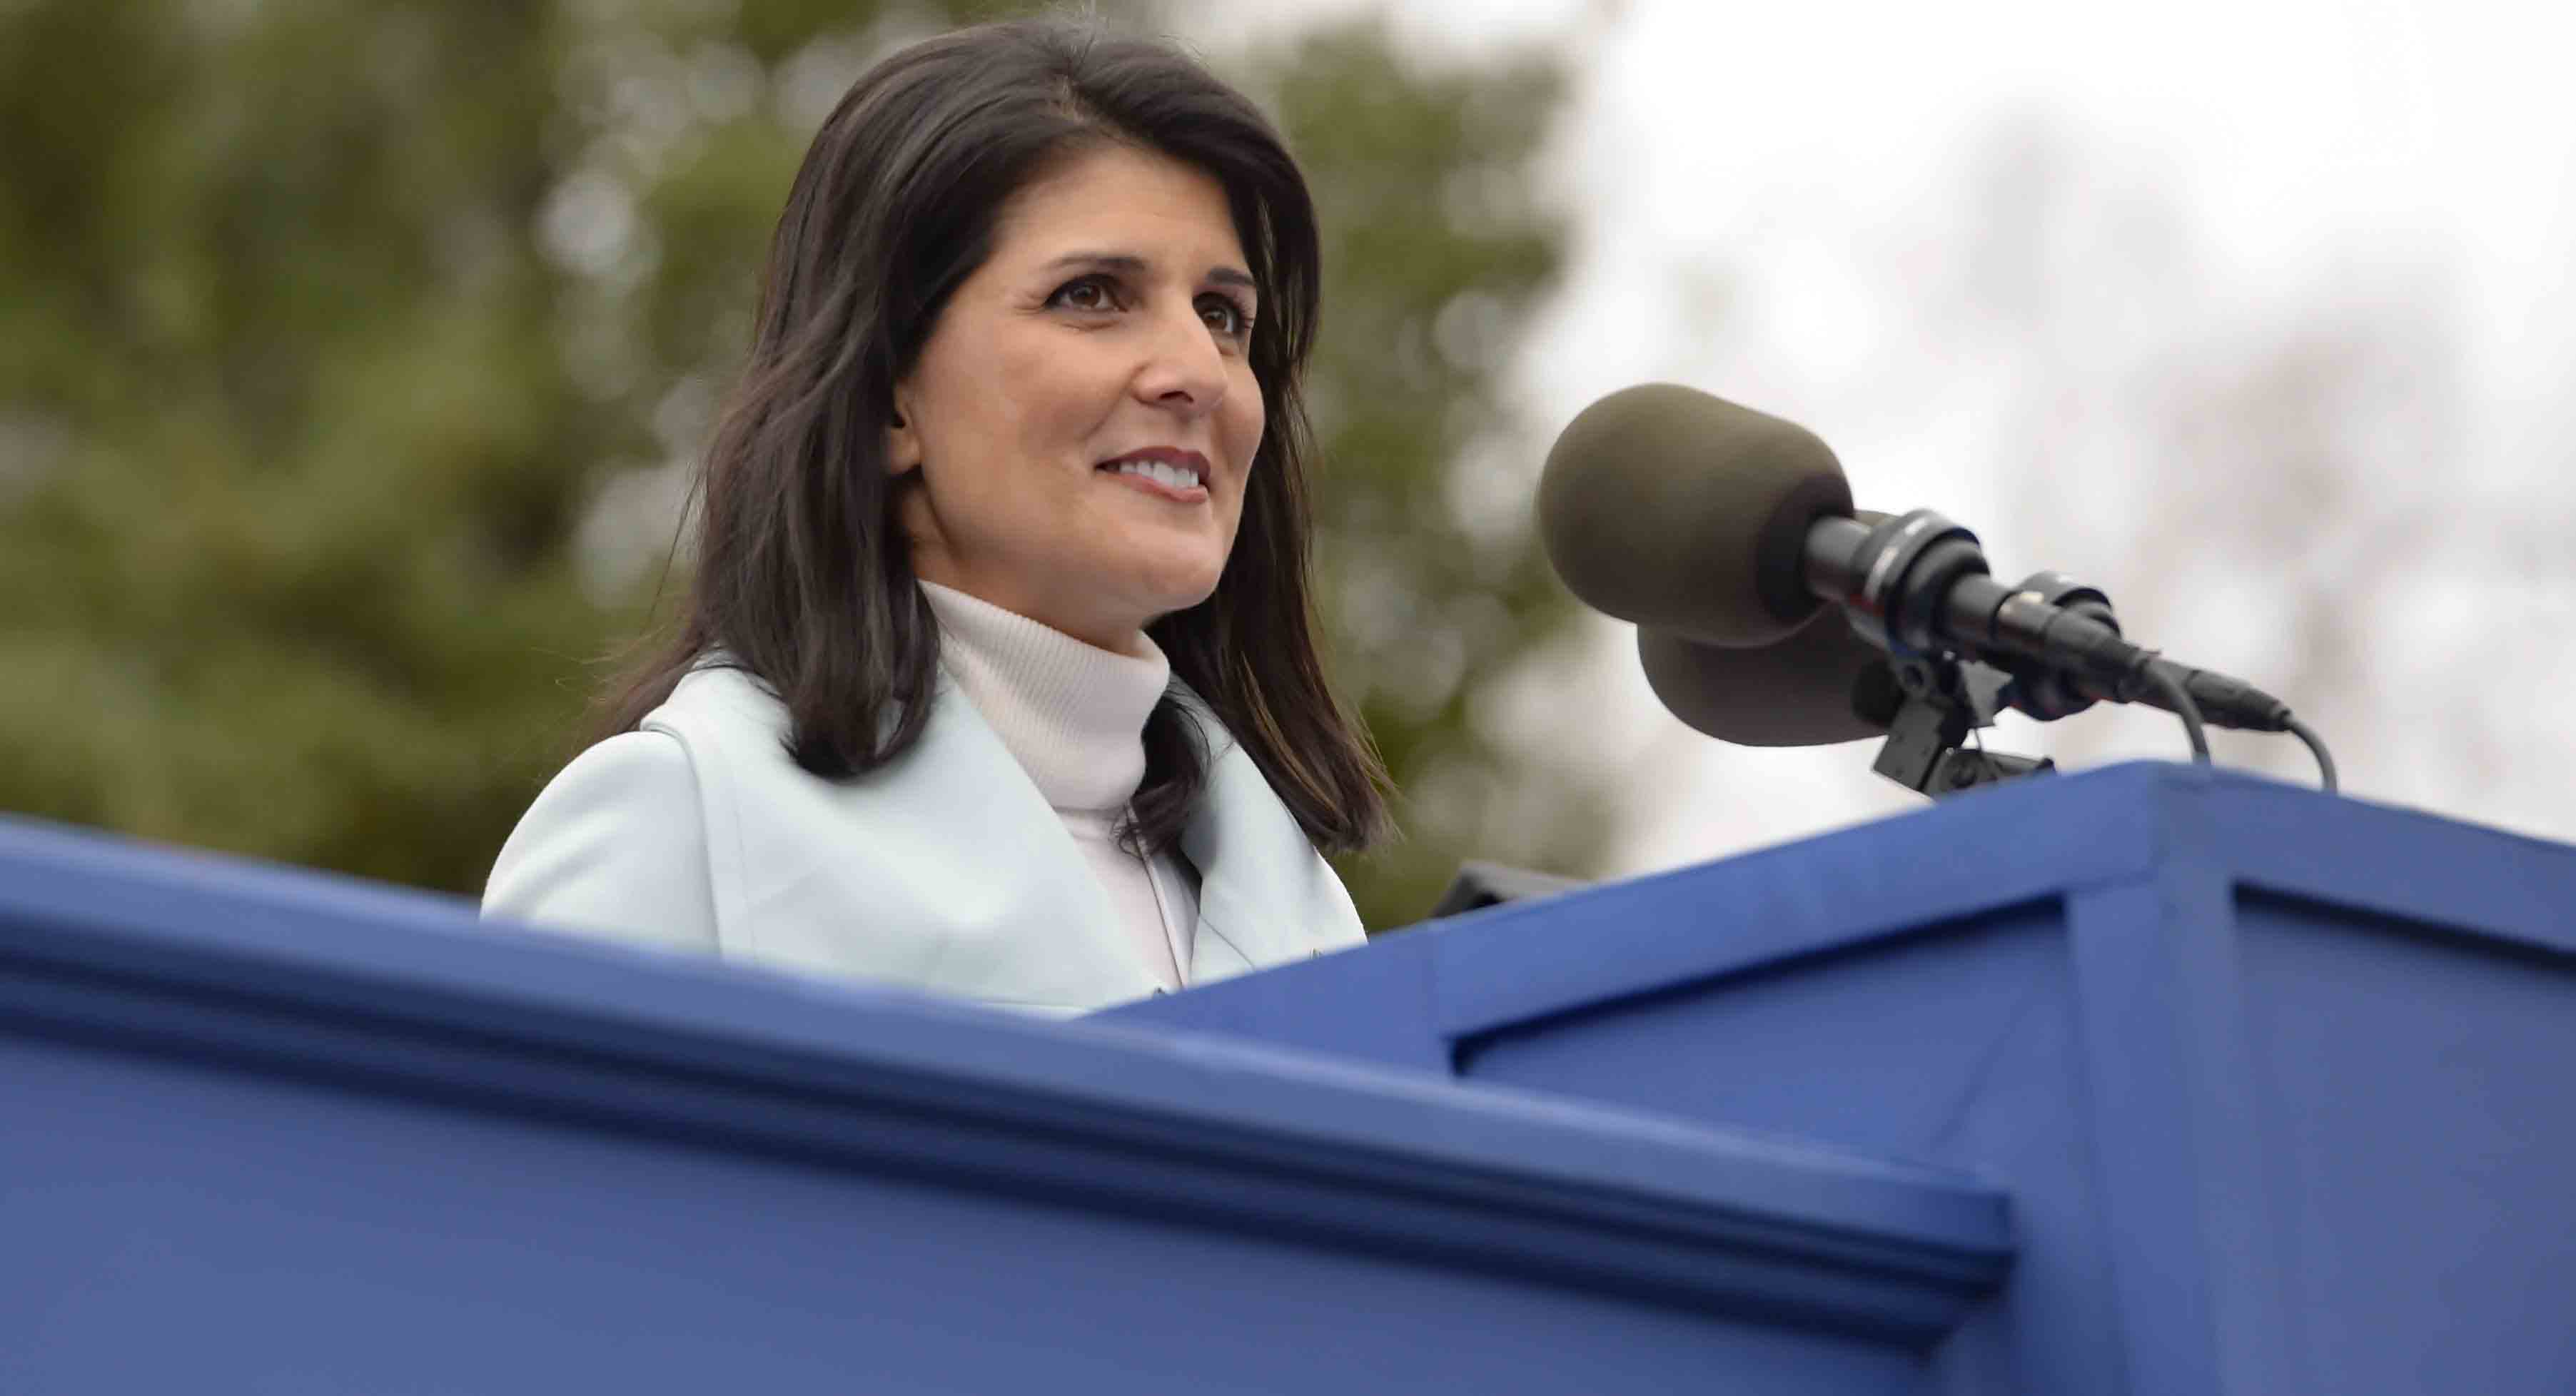 South Carolina Gov. Nikki Haley speaks to the crowd after being sworn in for her second term as governor, Wednesday, Jan. 14, 2015, at the state Capitol in Columbia, S.C. (AP Photo/Richard Shiro)